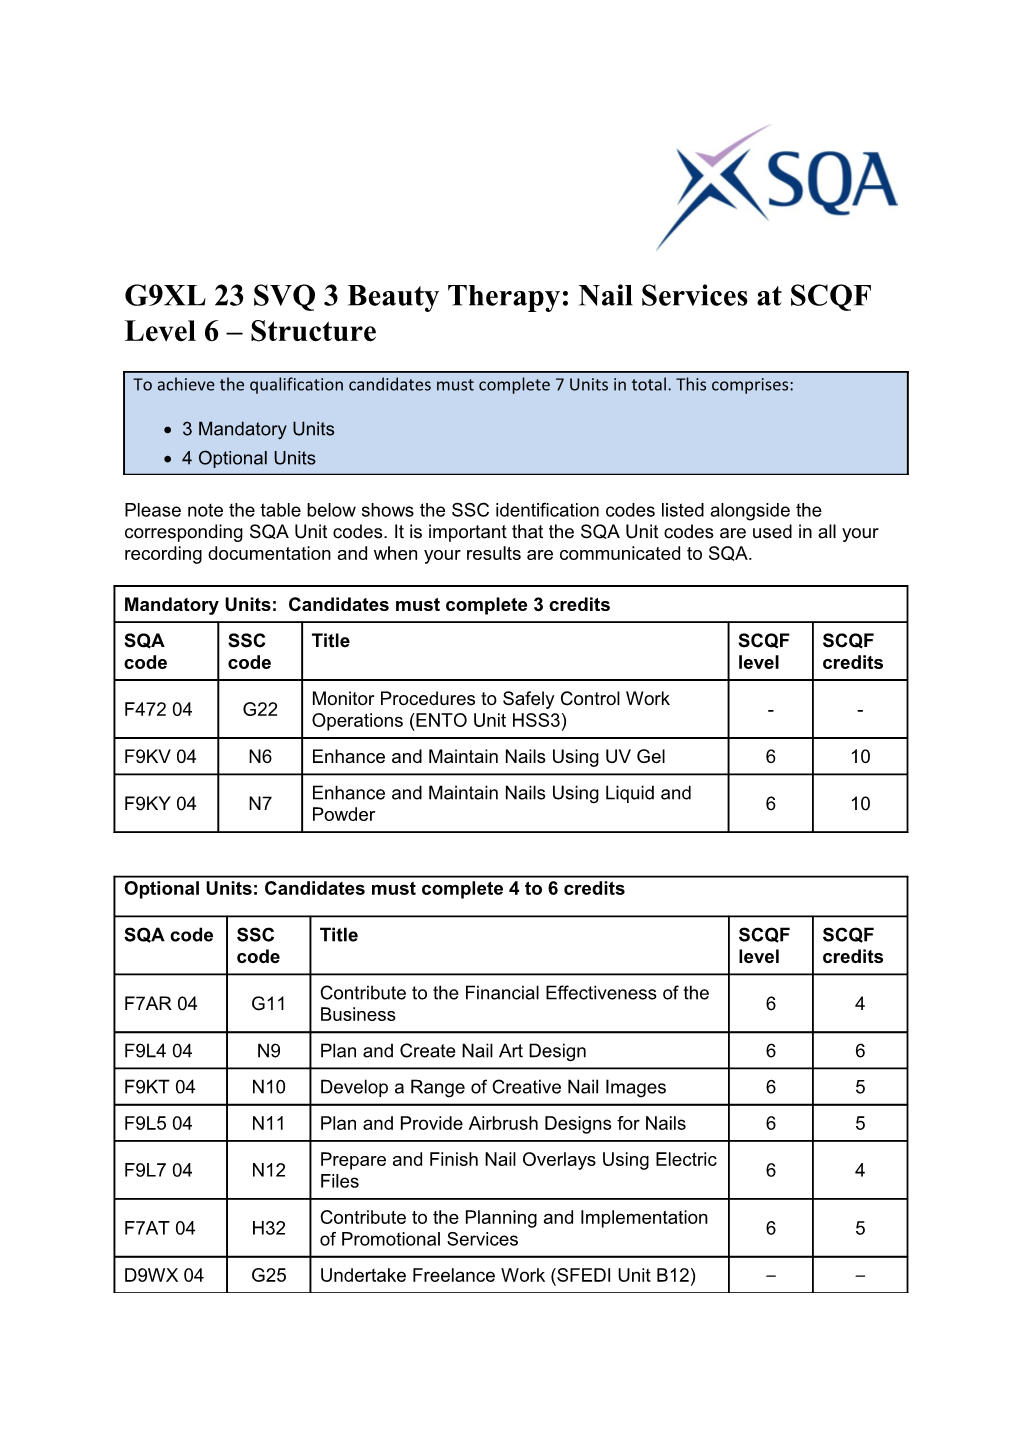 G9XL 23 SVQ 3 Beauty Therapy:Nail Services at SCQF Level 6 Structure